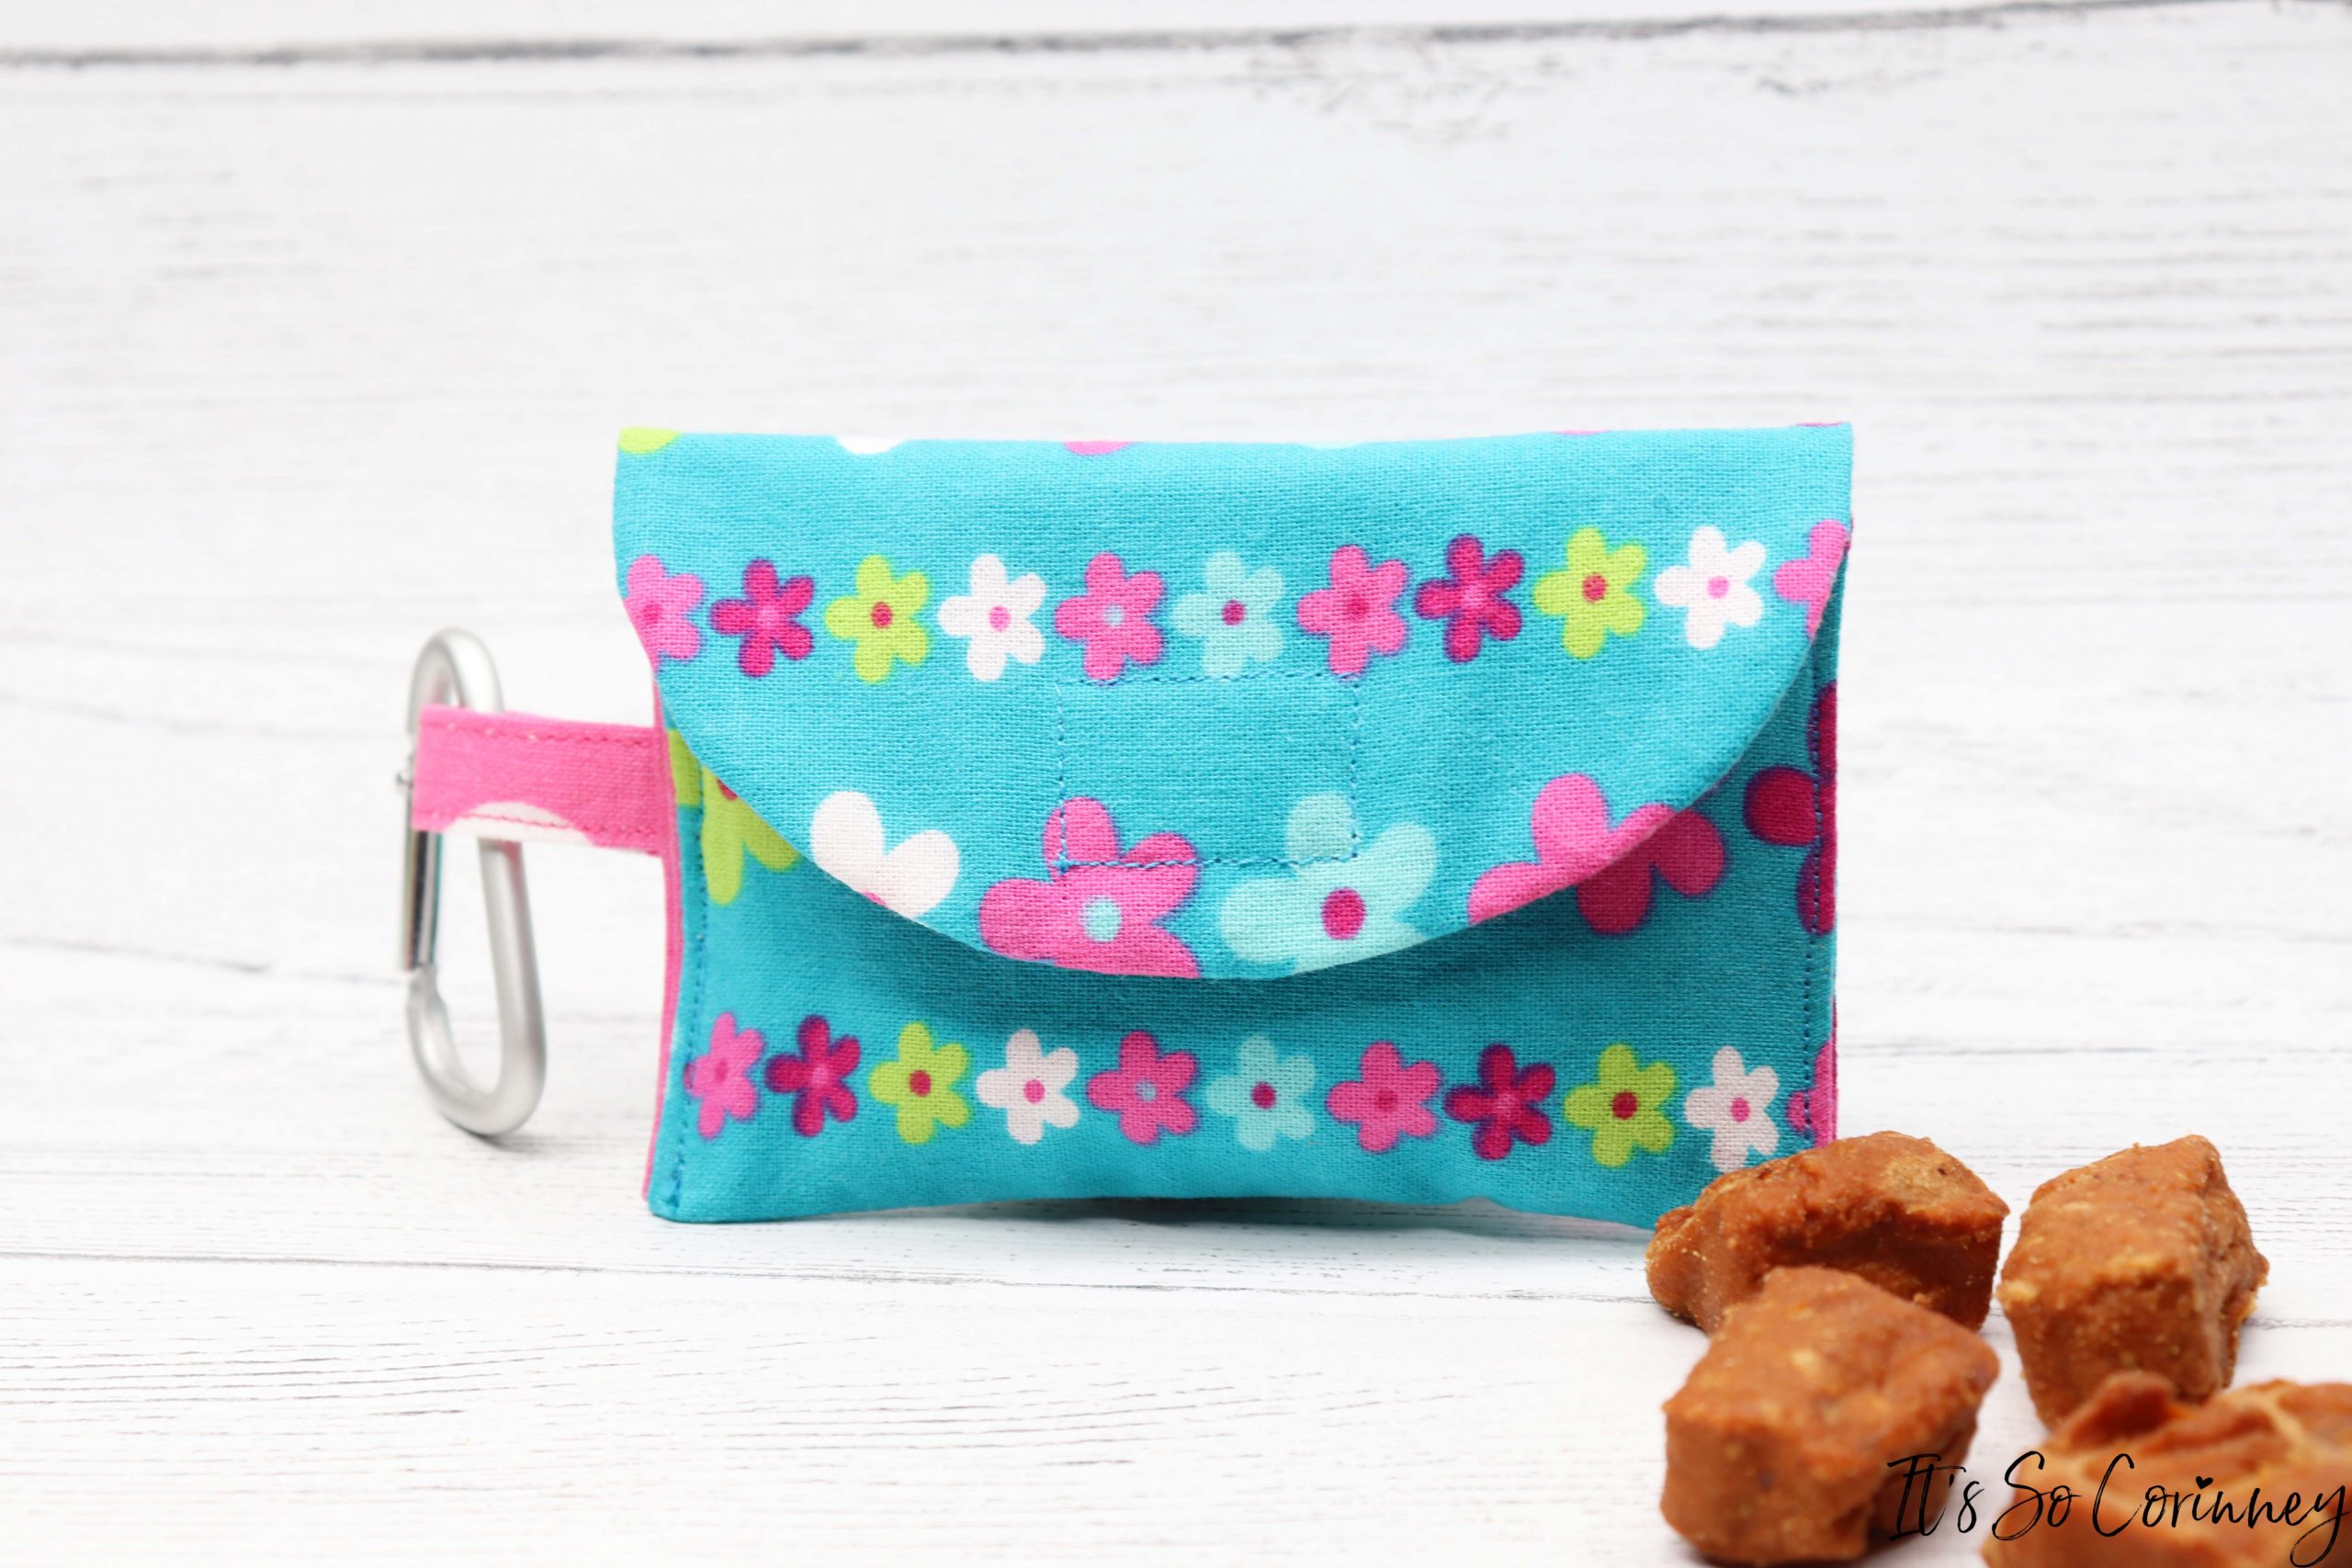 DIY Training Treat Bag Pouch + PRINTABLE SEWING PATTERN (STEP BY